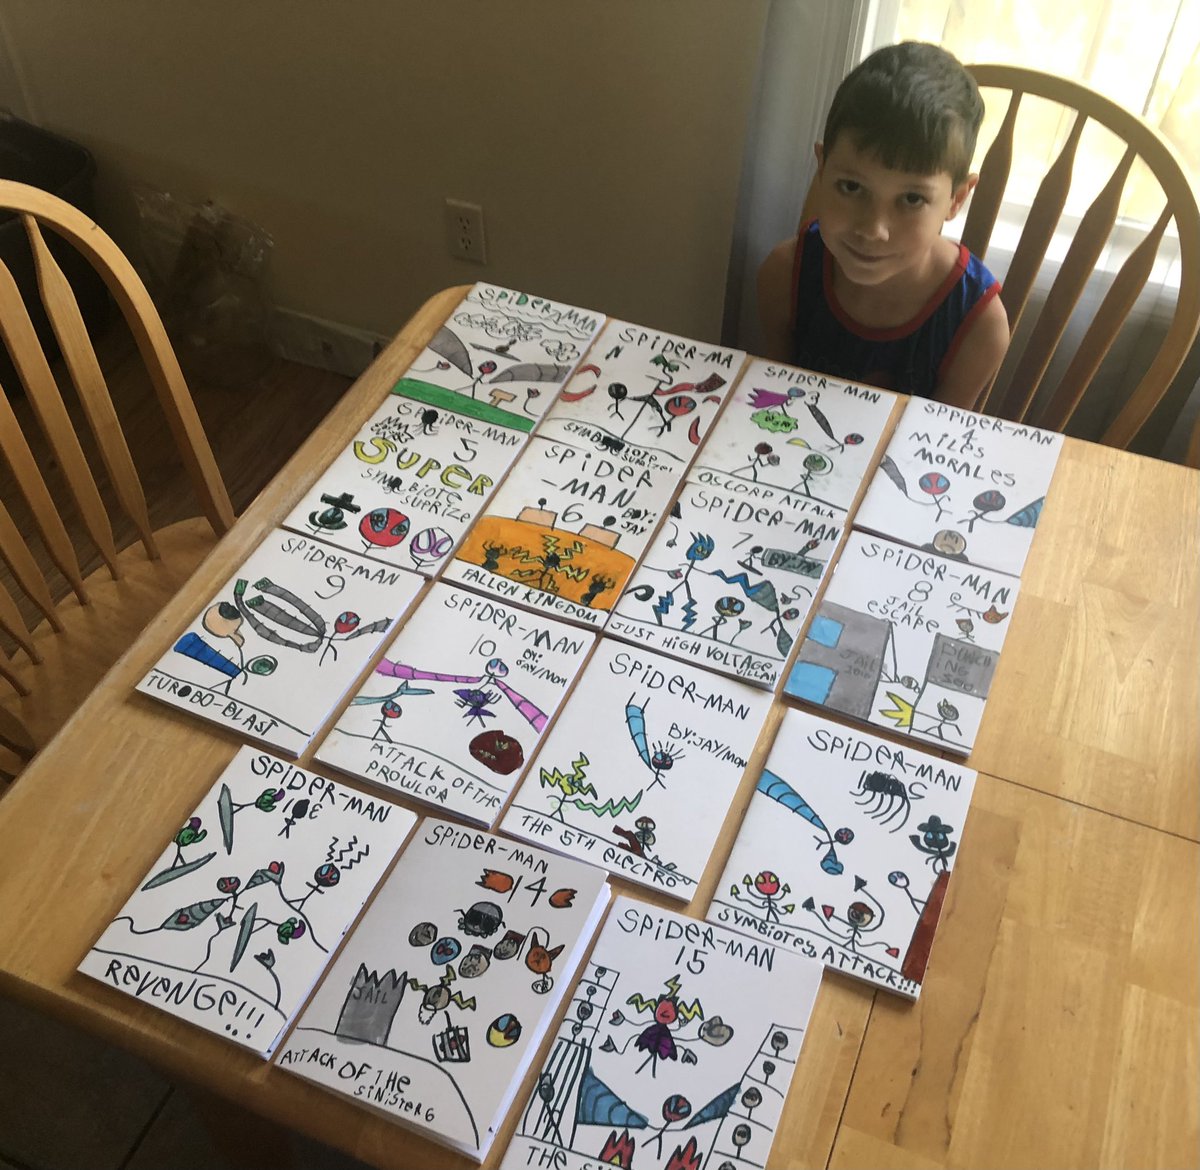 My 7yo has now written 15 #SpiderMan comics - 16 pages in every book.

@marvel #makingcomics